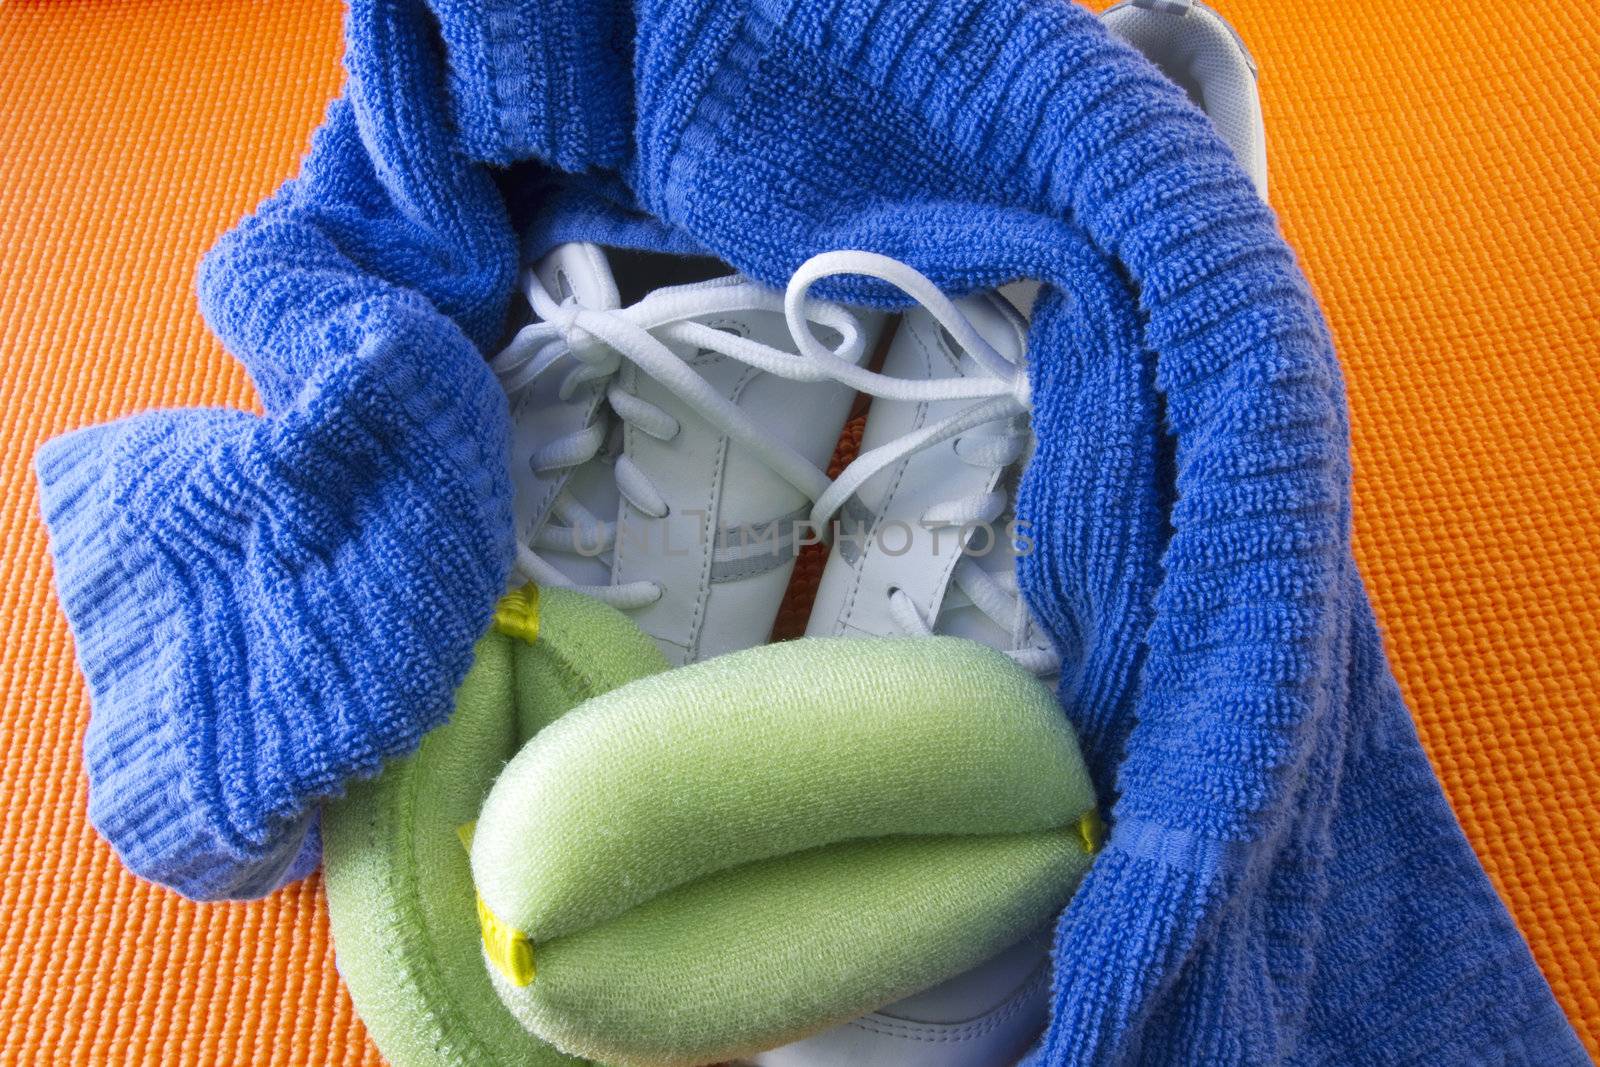 White sneakers, green wrist weights, and a blue towel on an orange yoga mat background reflect exercise readiness